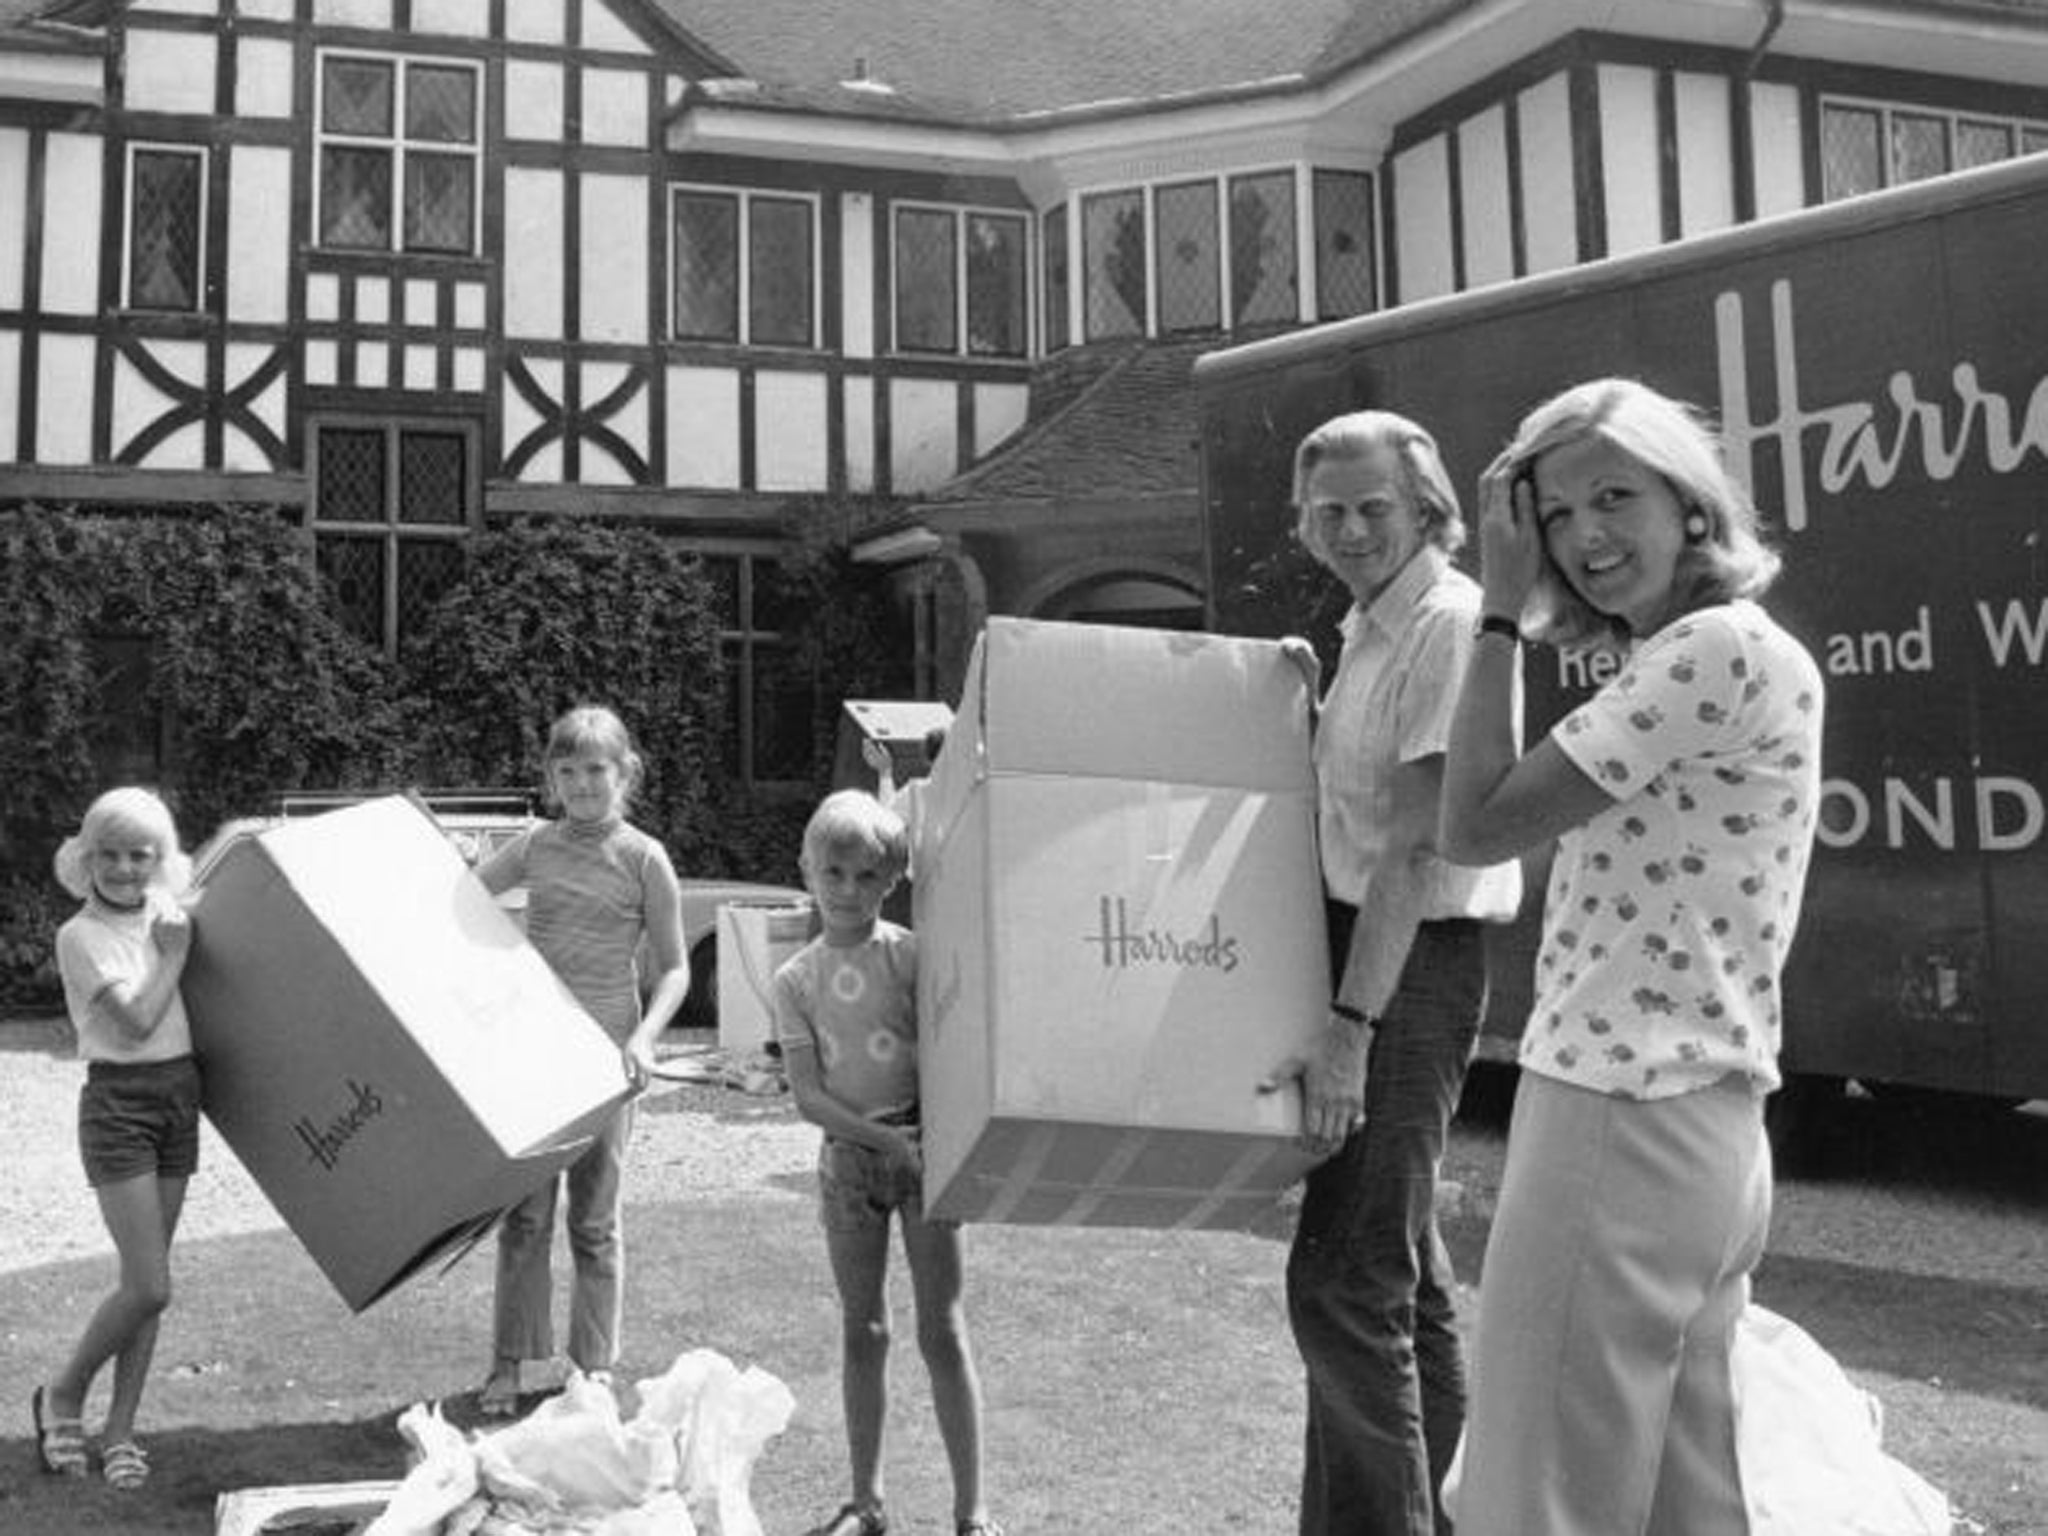 When the Heseltine family were moving home in 1973, people could look forward to decades of house price rises